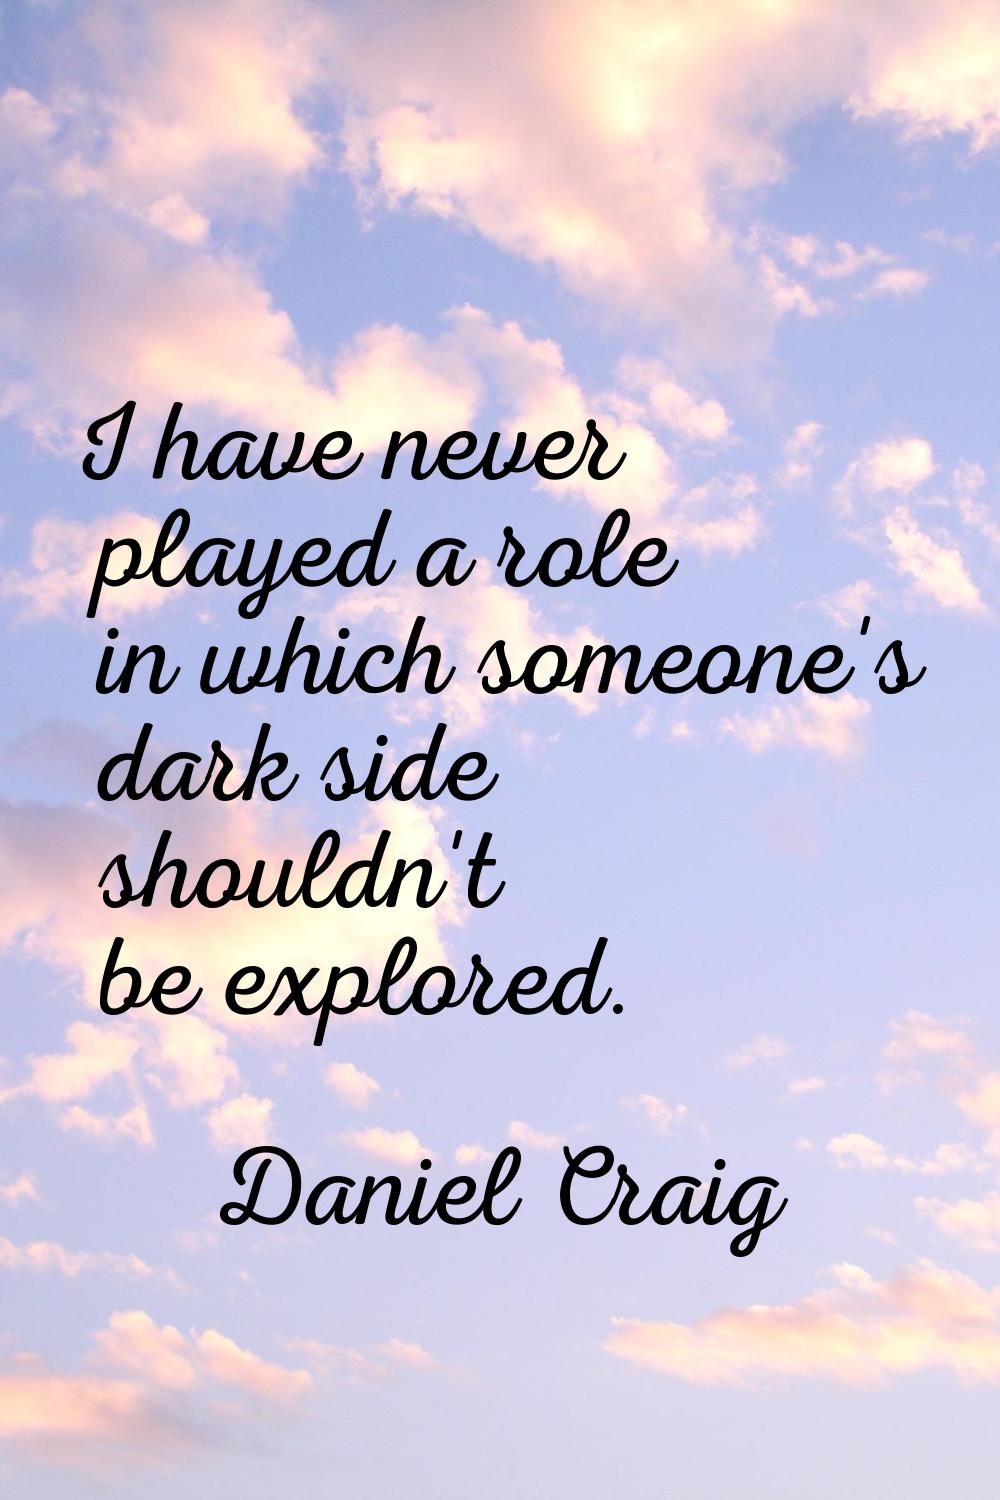 I have never played a role in which someone's dark side shouldn't be explored.